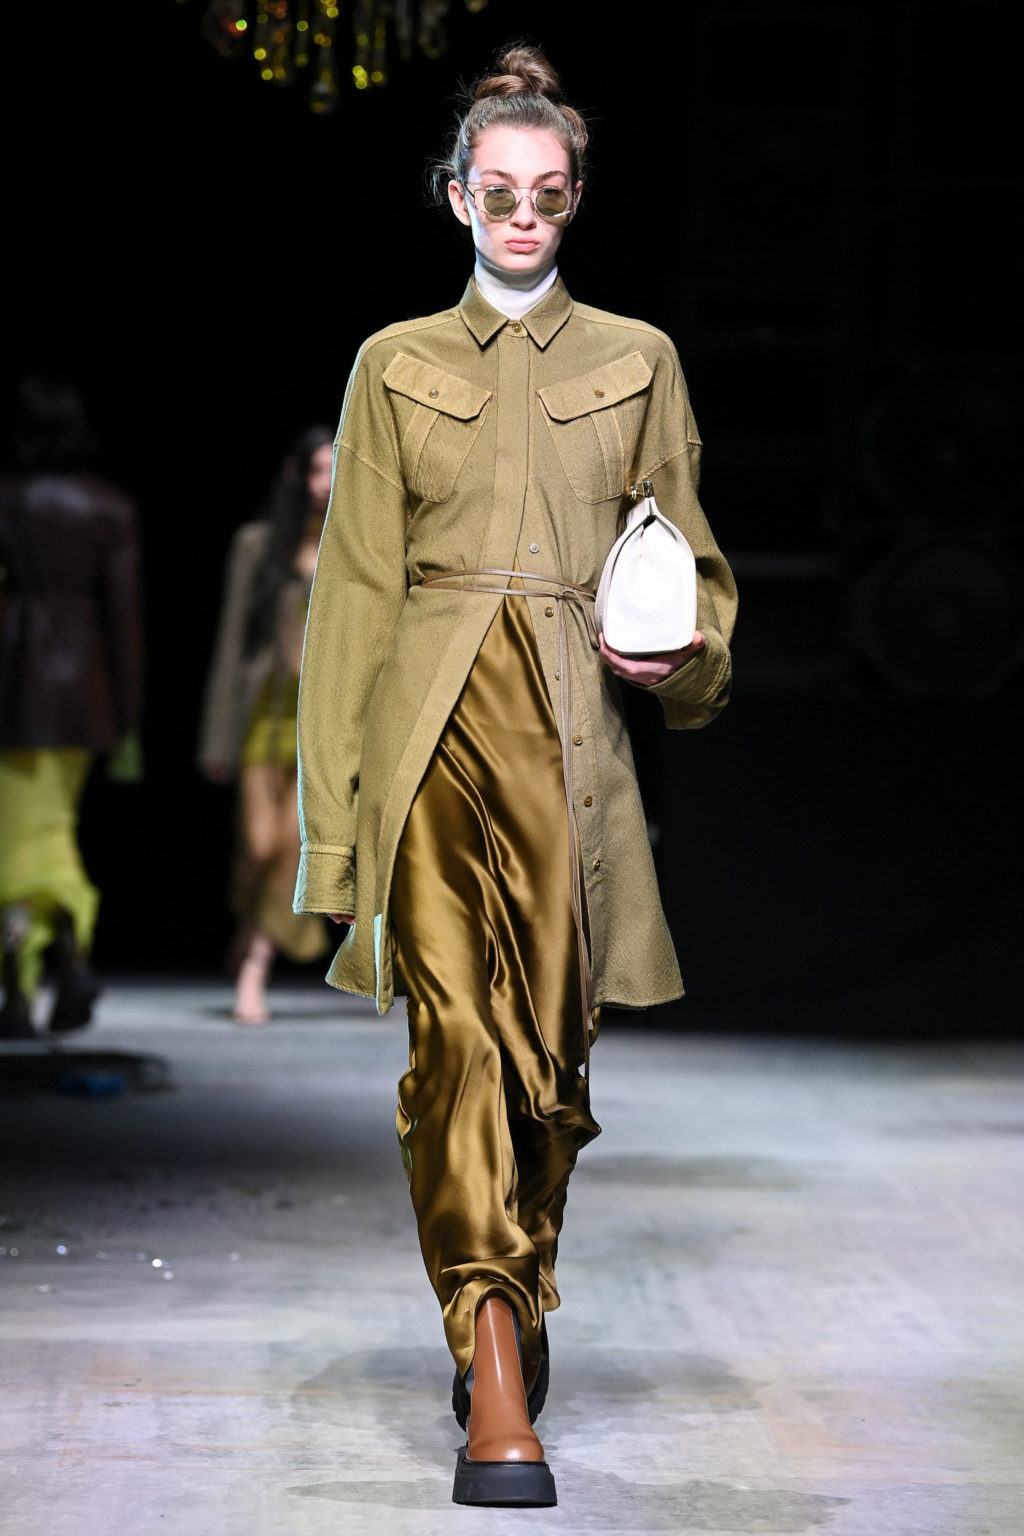 Fall winter 2021 runway report: The 12 best Fall Winter fashion trends ...